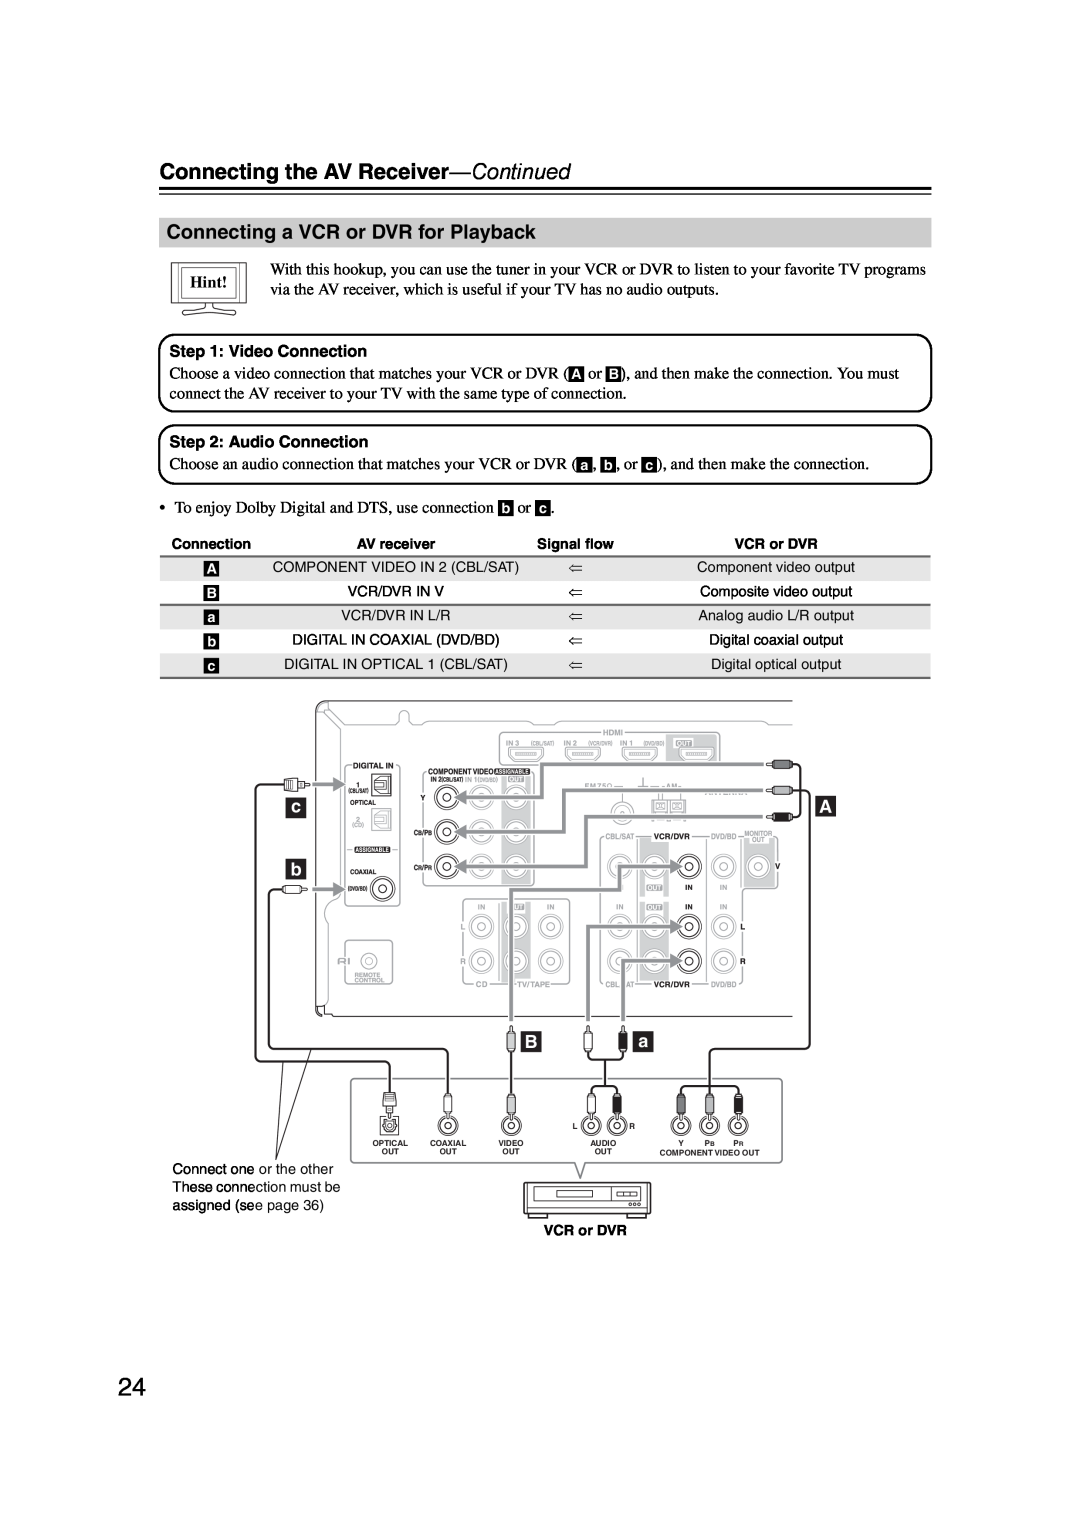 Onkyo TXSR307 instruction manual Connecting a VCR or DVR for Playback, Connecting the AV Receiver-Continued, Hint 